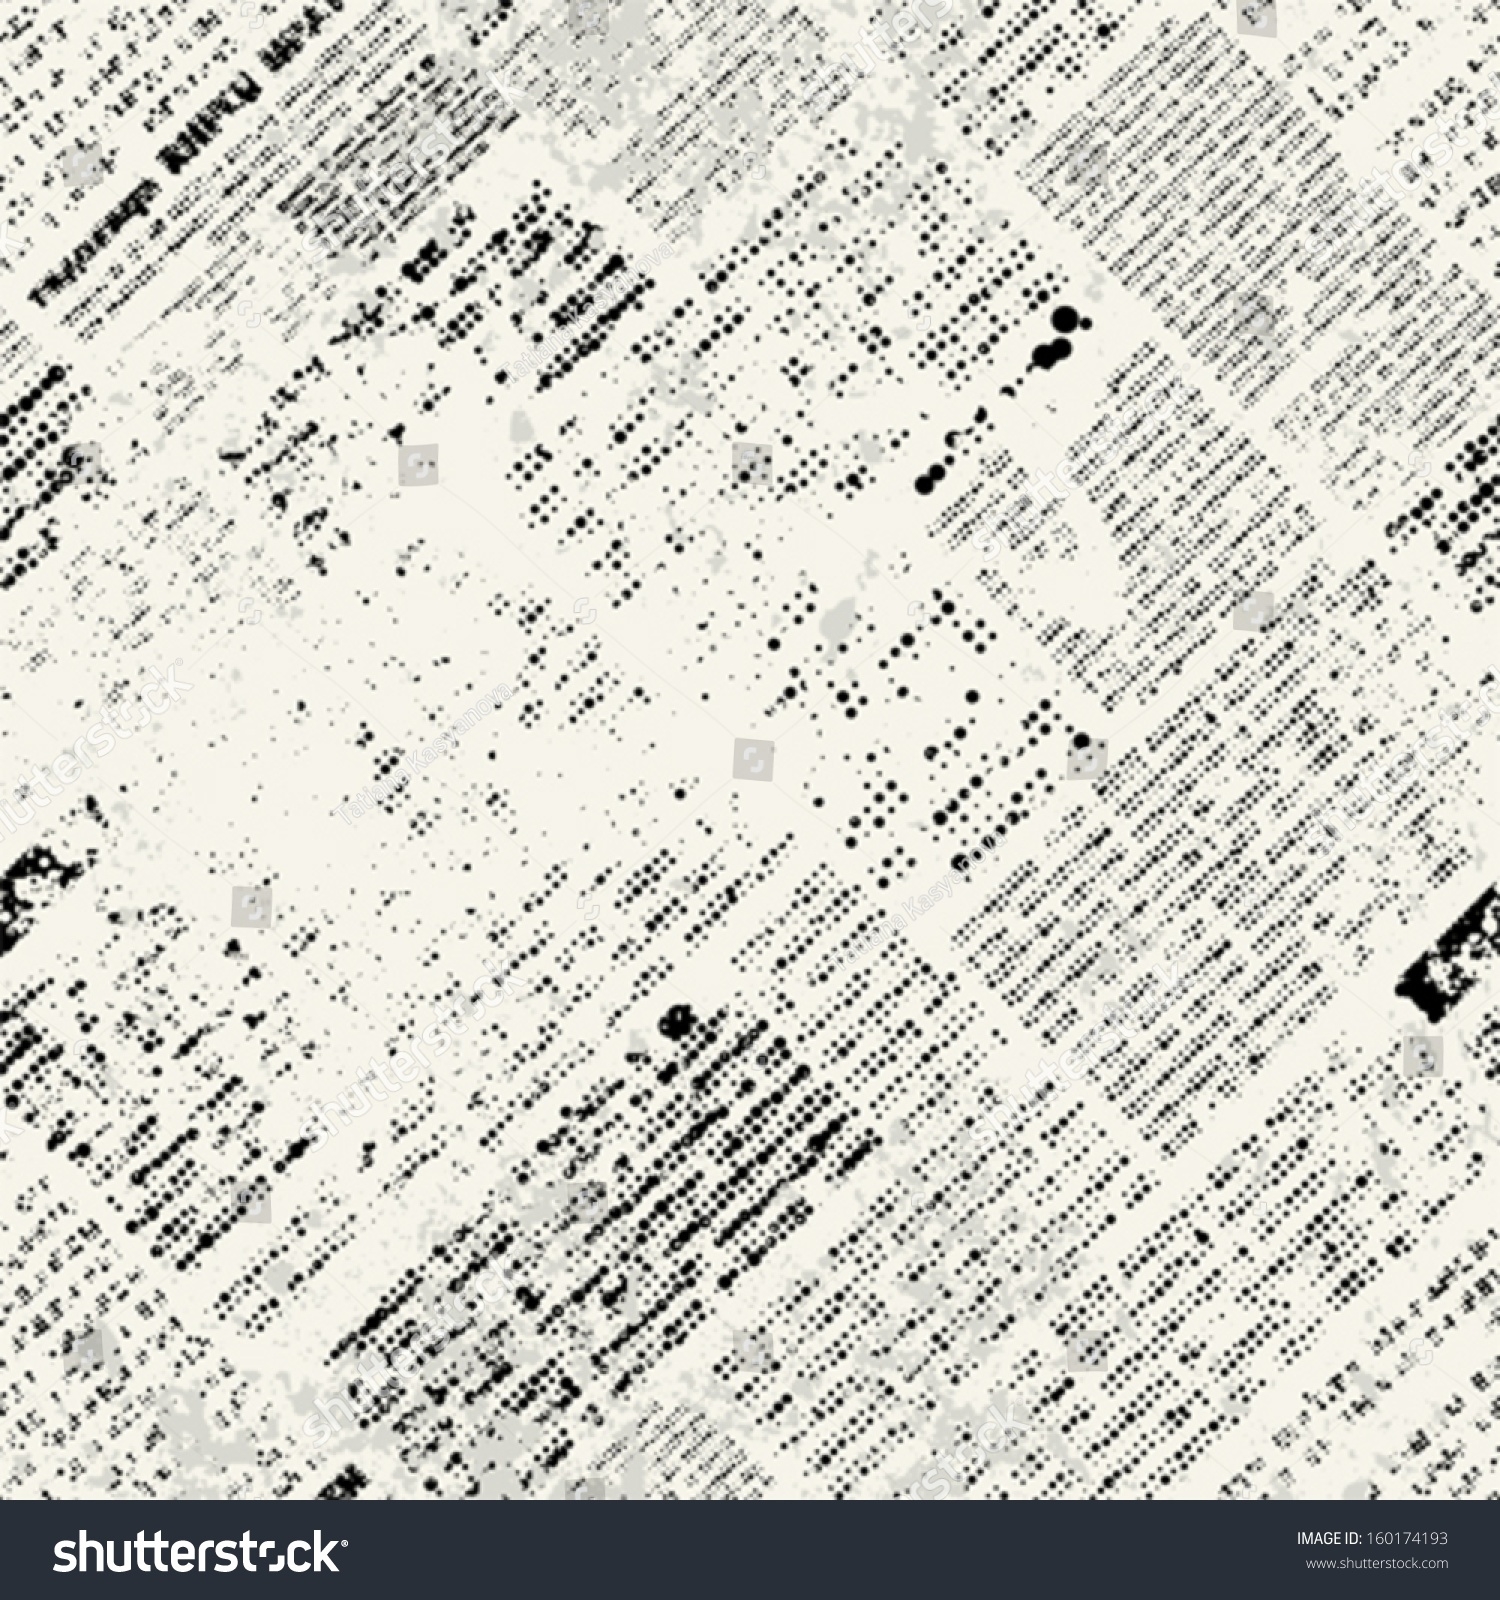 Newspaper Background Png | World of Label